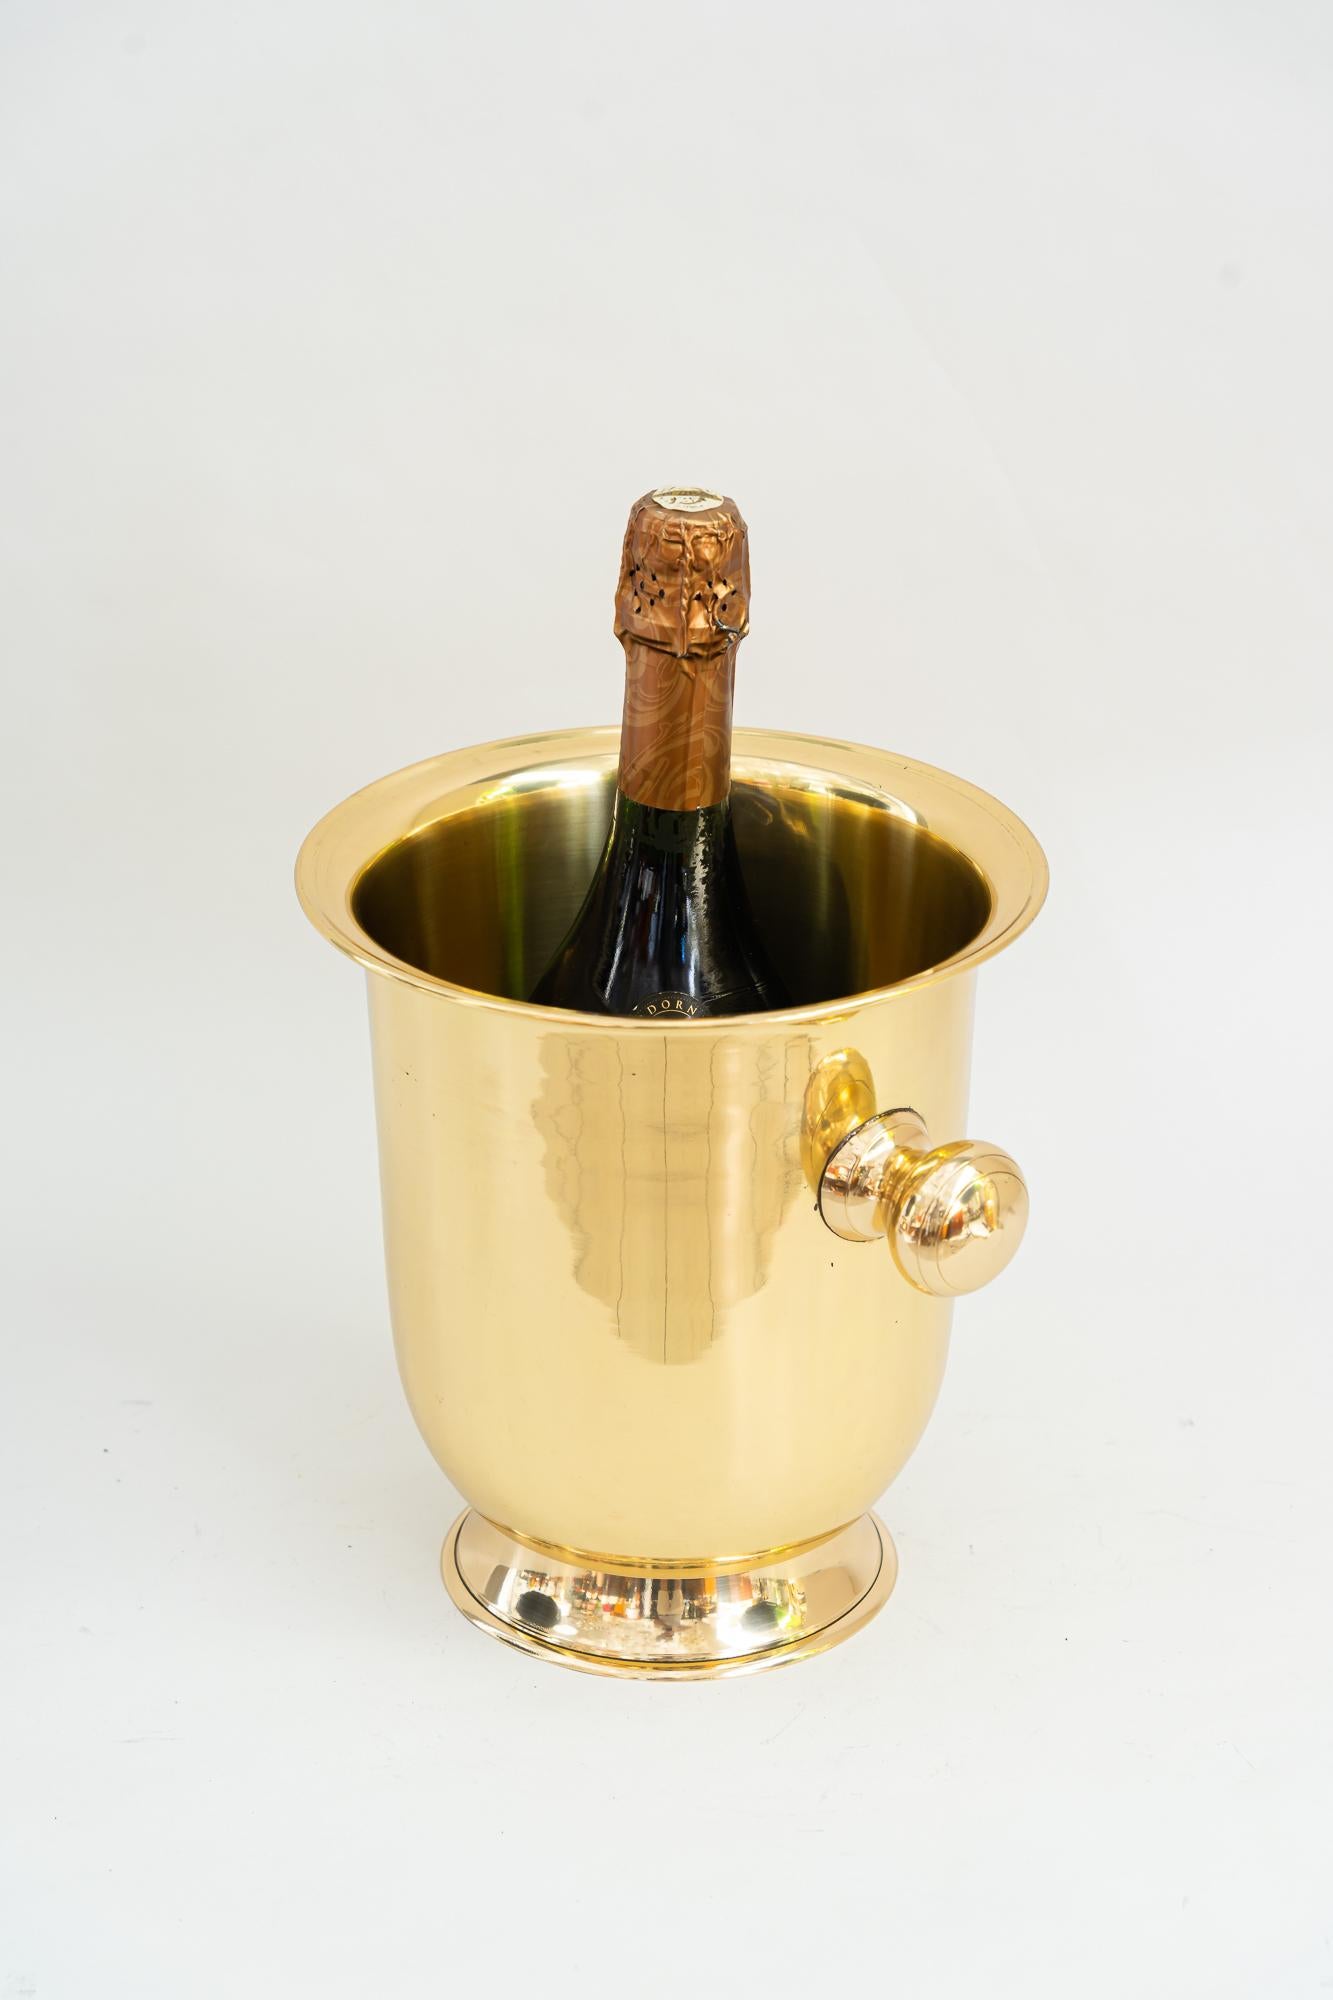 Art Deco Champagne cooler, Vienna Around 1920s 
Polished and stove enamameled
( bottle is not included it is only for the photoshooting ).